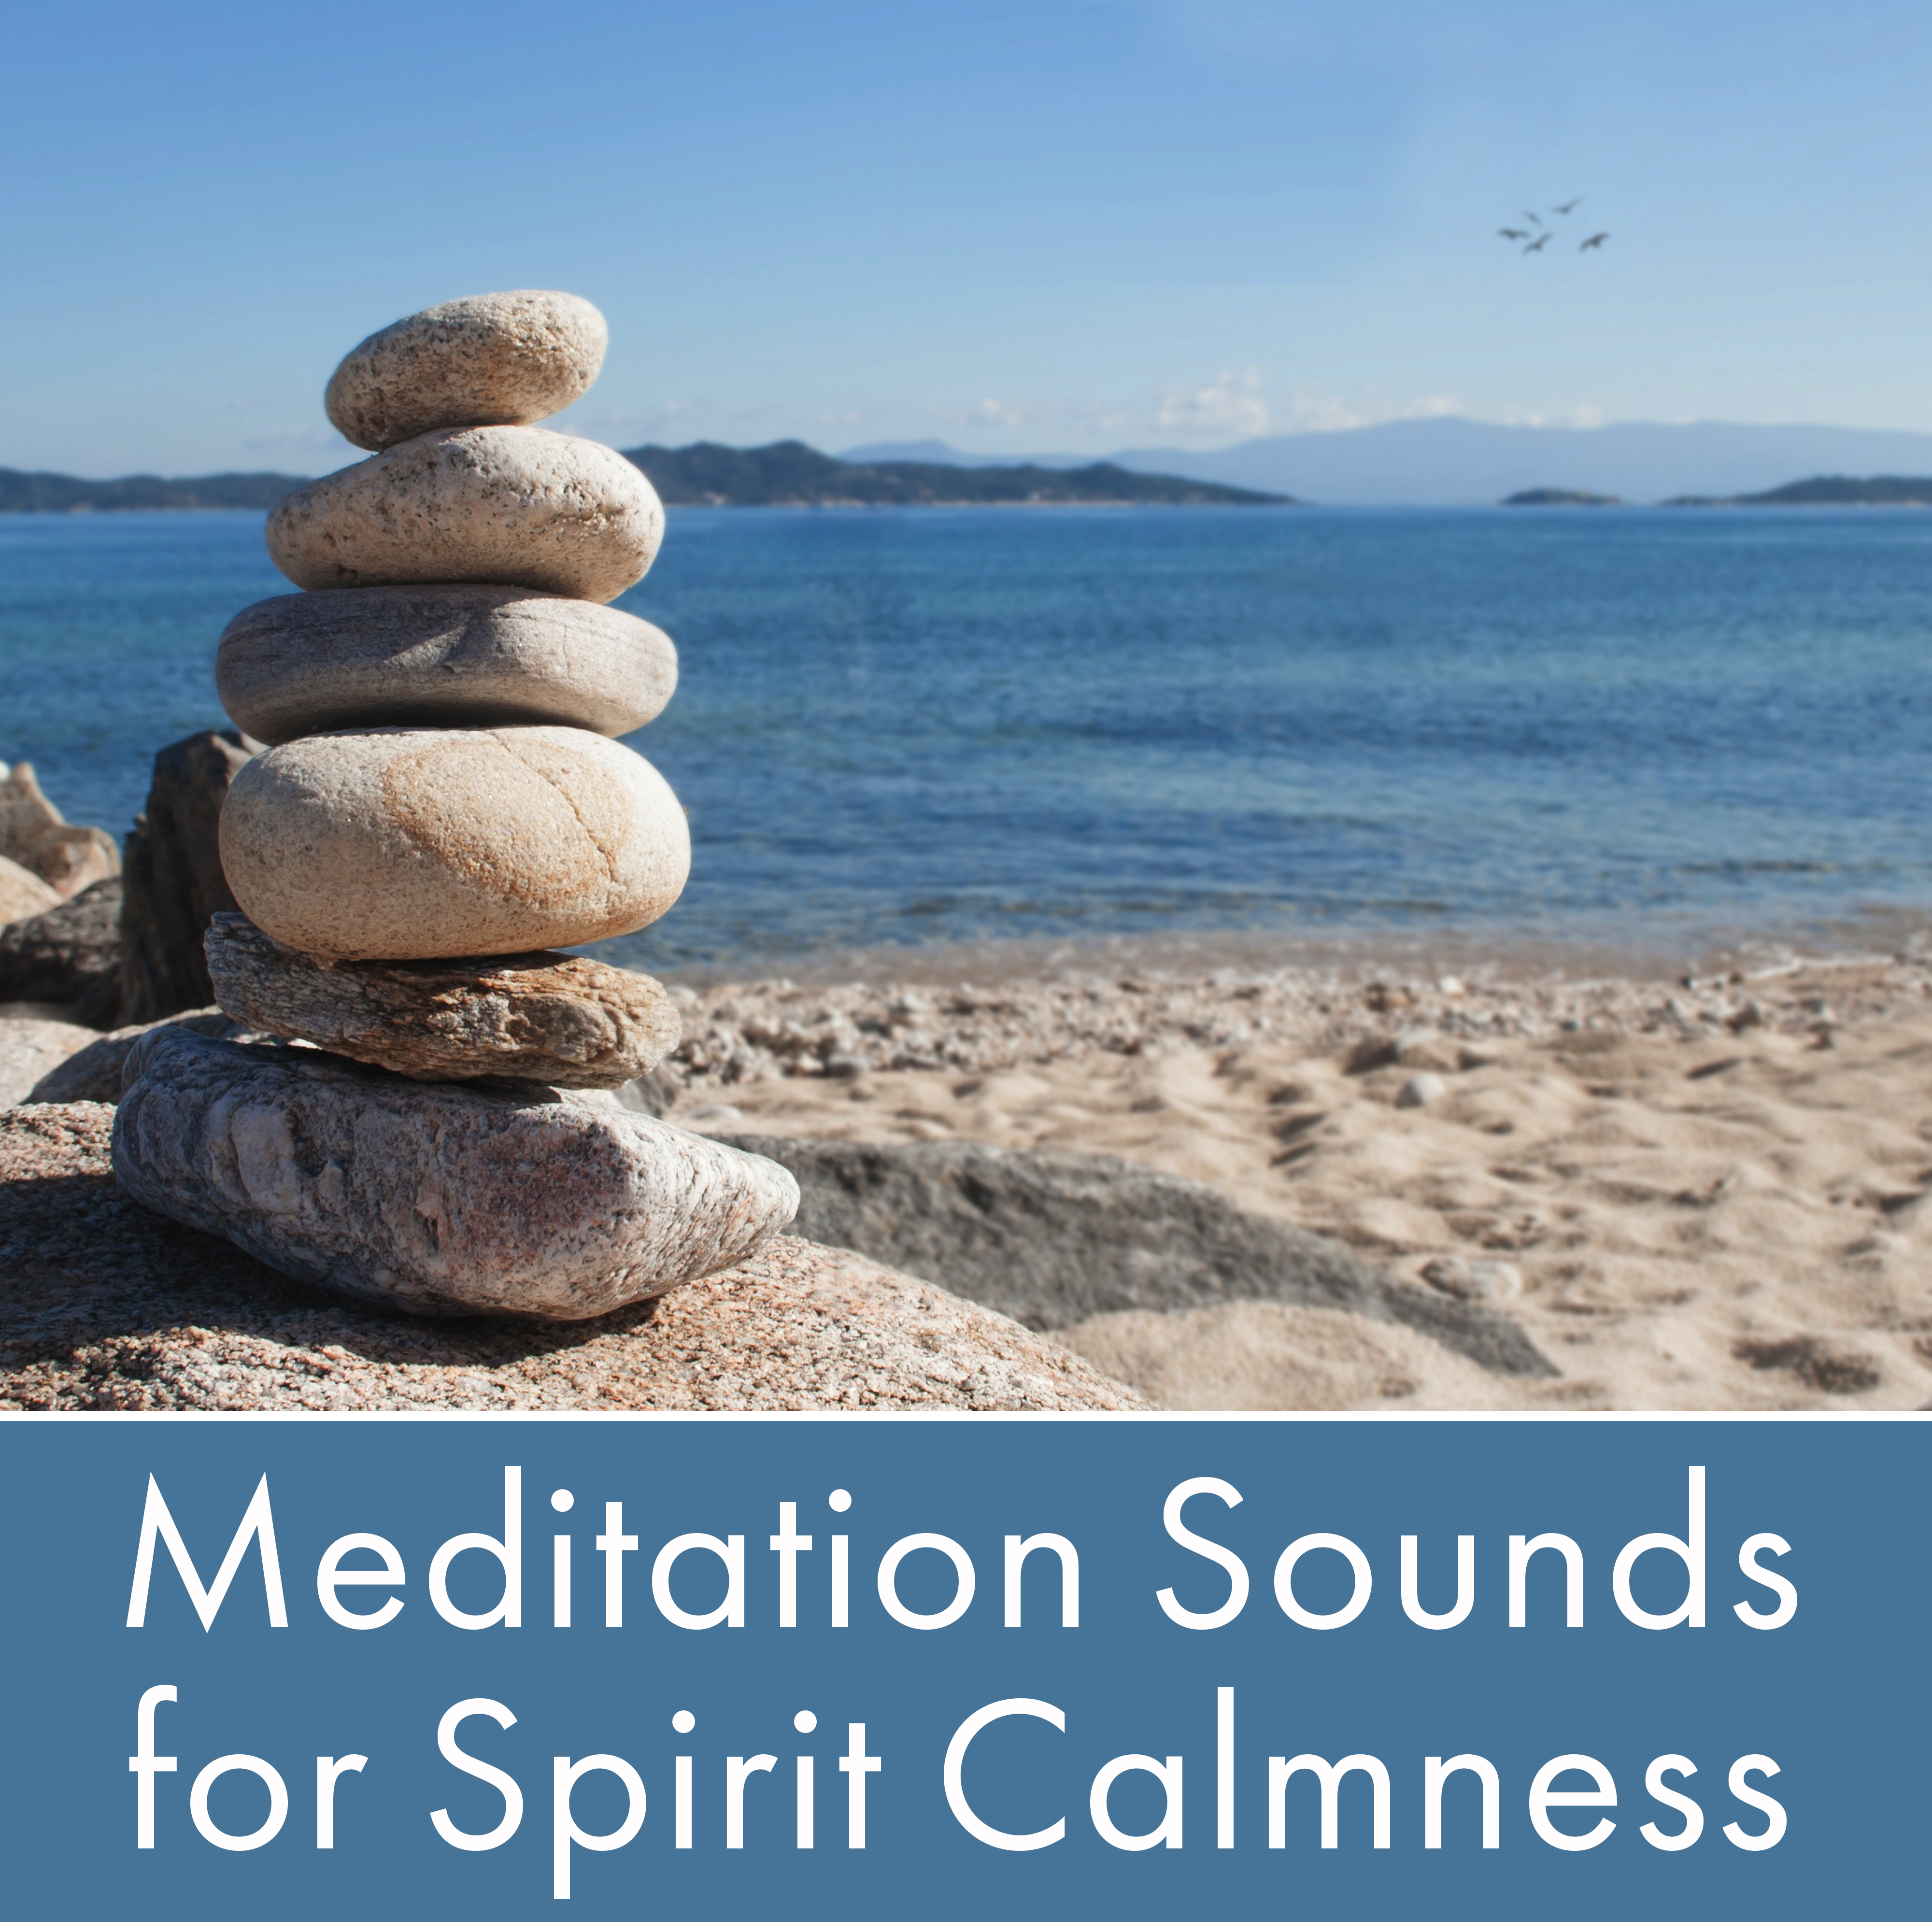 Meditation Sounds for Spirit Calmness  Soothing Waves, Rest with New Age, Buddha Relaxation, Lounge Music